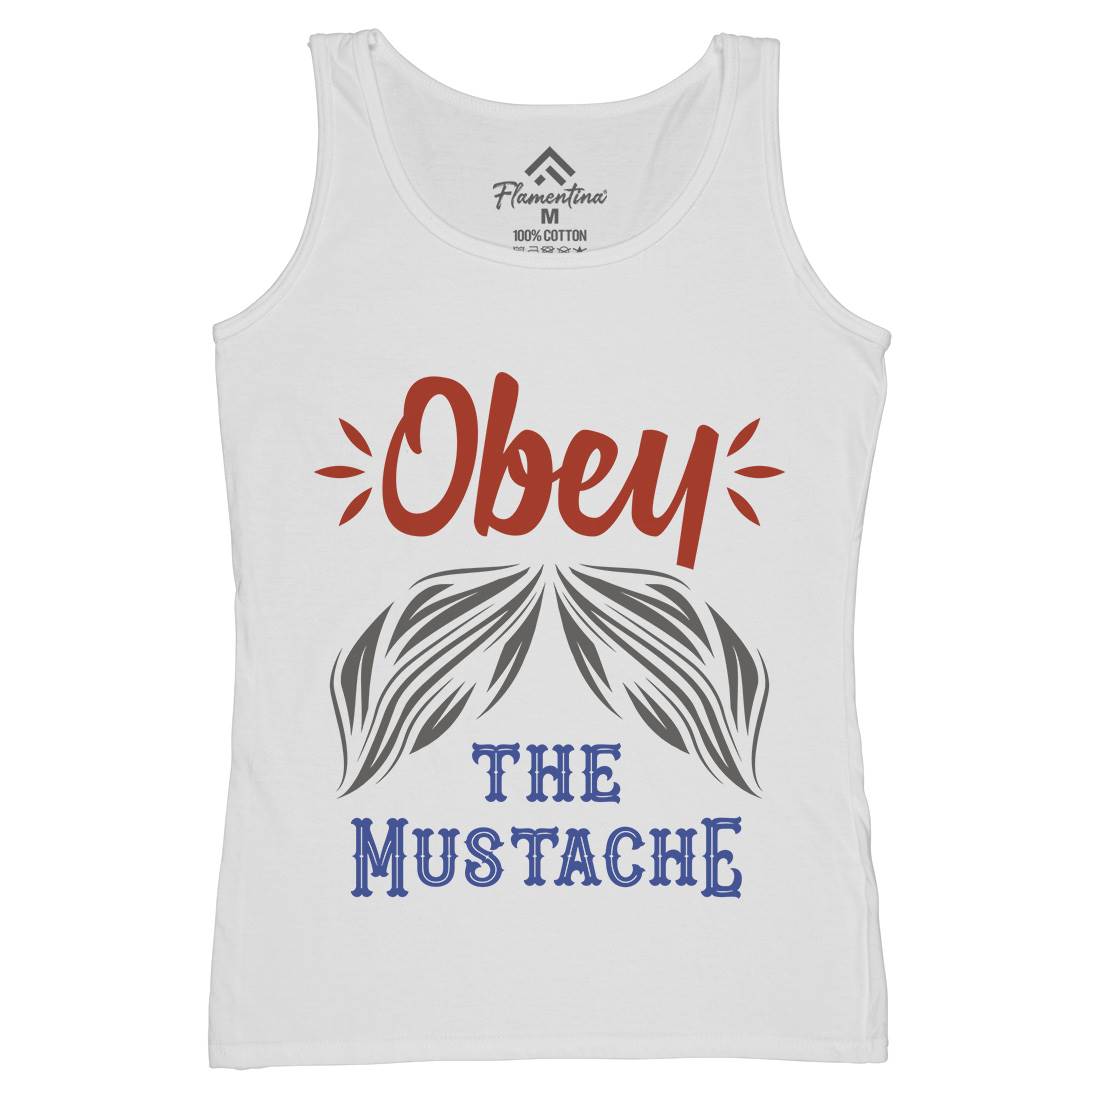 Obey The Moustache Womens Organic Tank Top Vest Barber C802